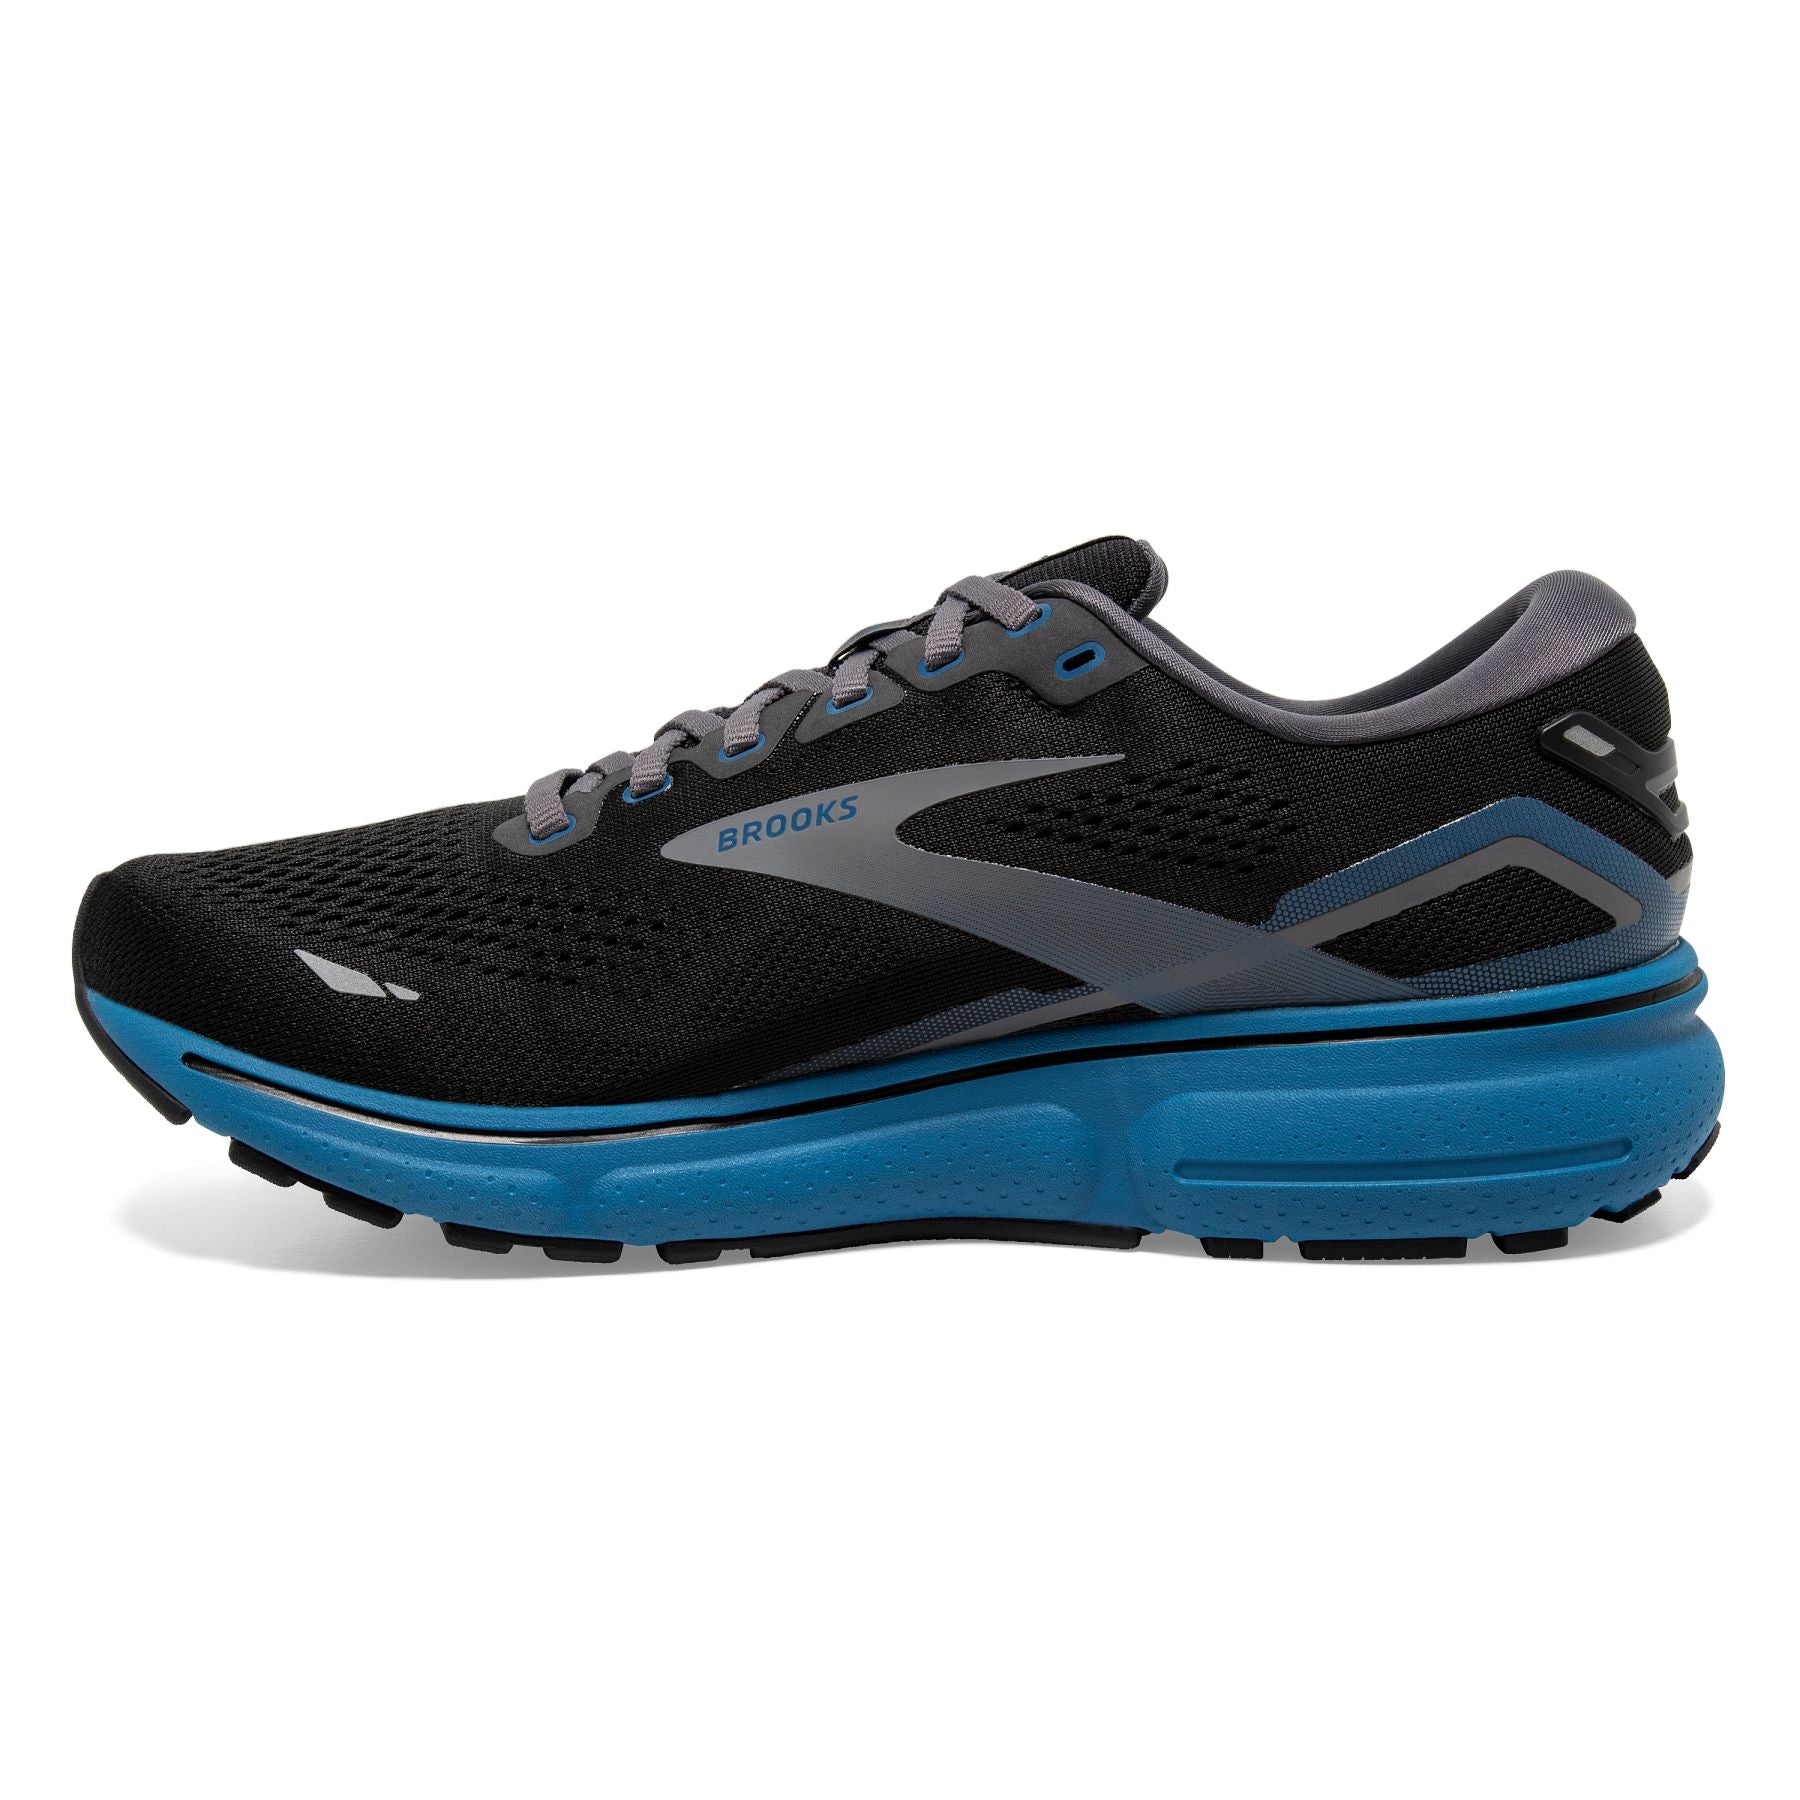 Medial view of the Men's Ghost 15 by Brooks in the color Black/Blackened Pearl/Blue